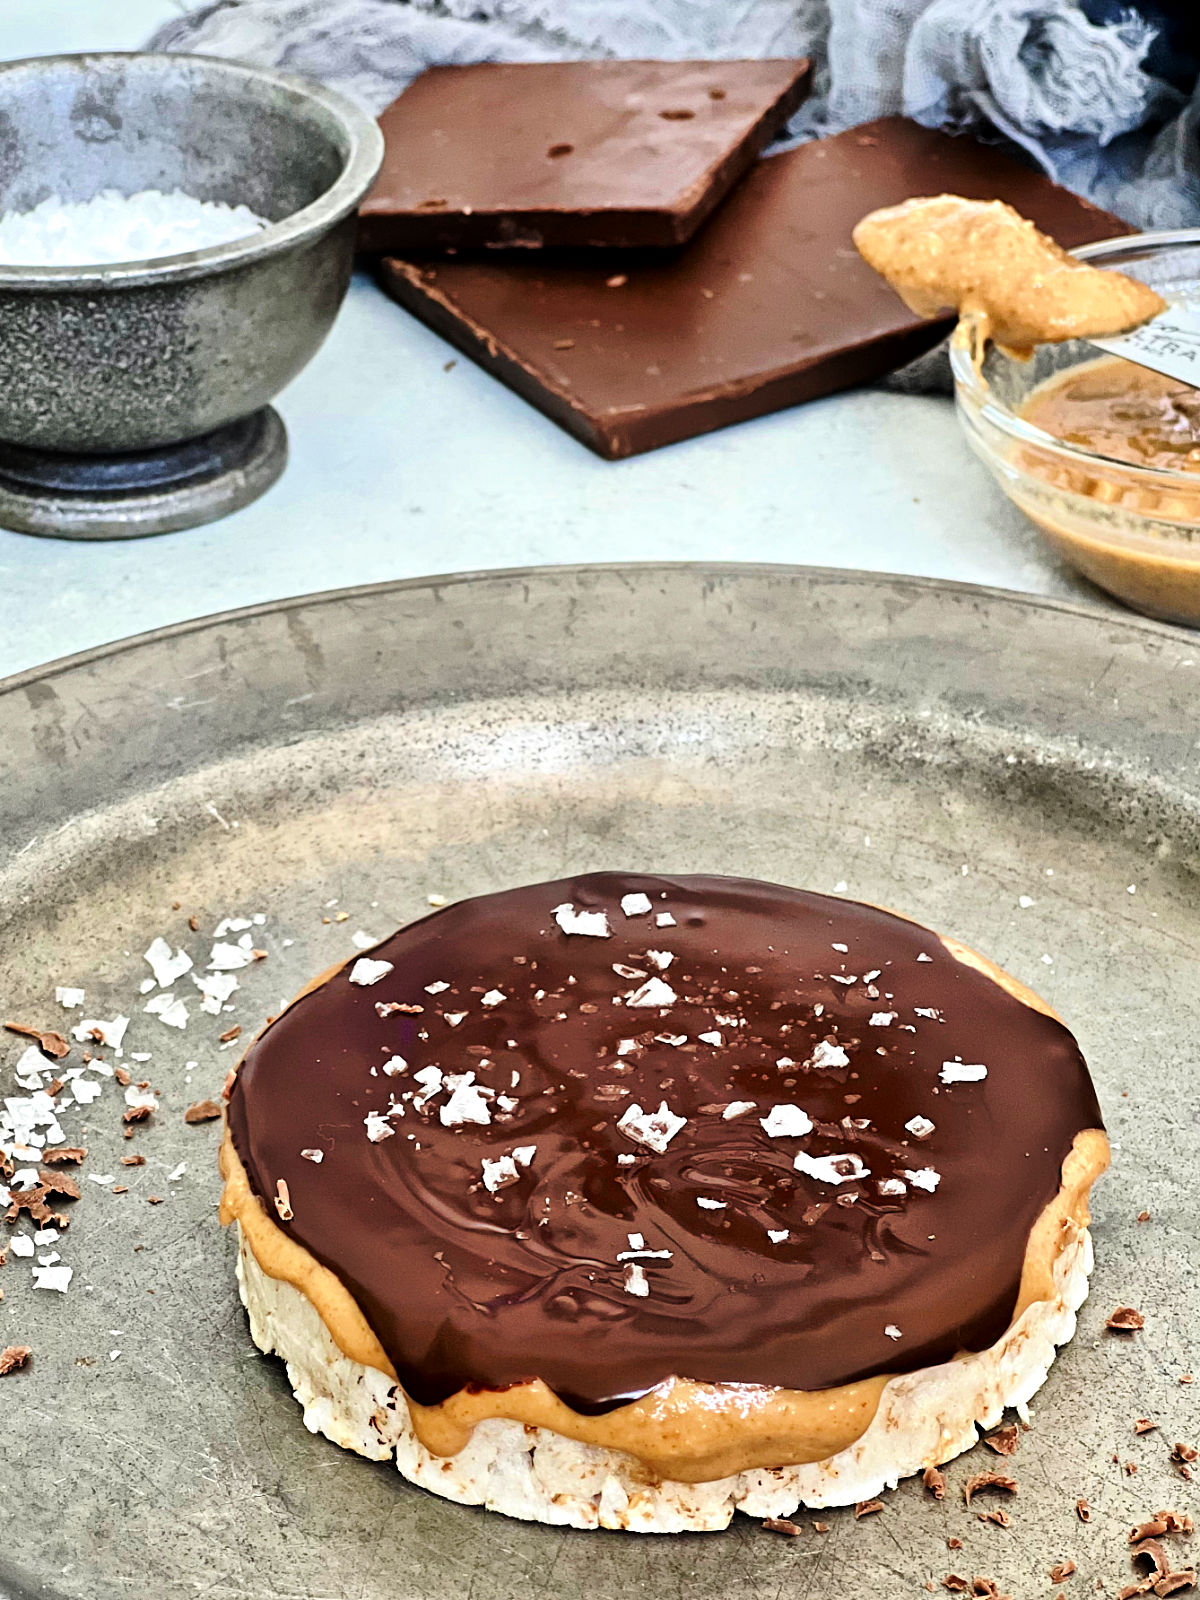 Giant peanut butter cup rice cake on a silver plate with chocolate, peanut butter and salt in the background.